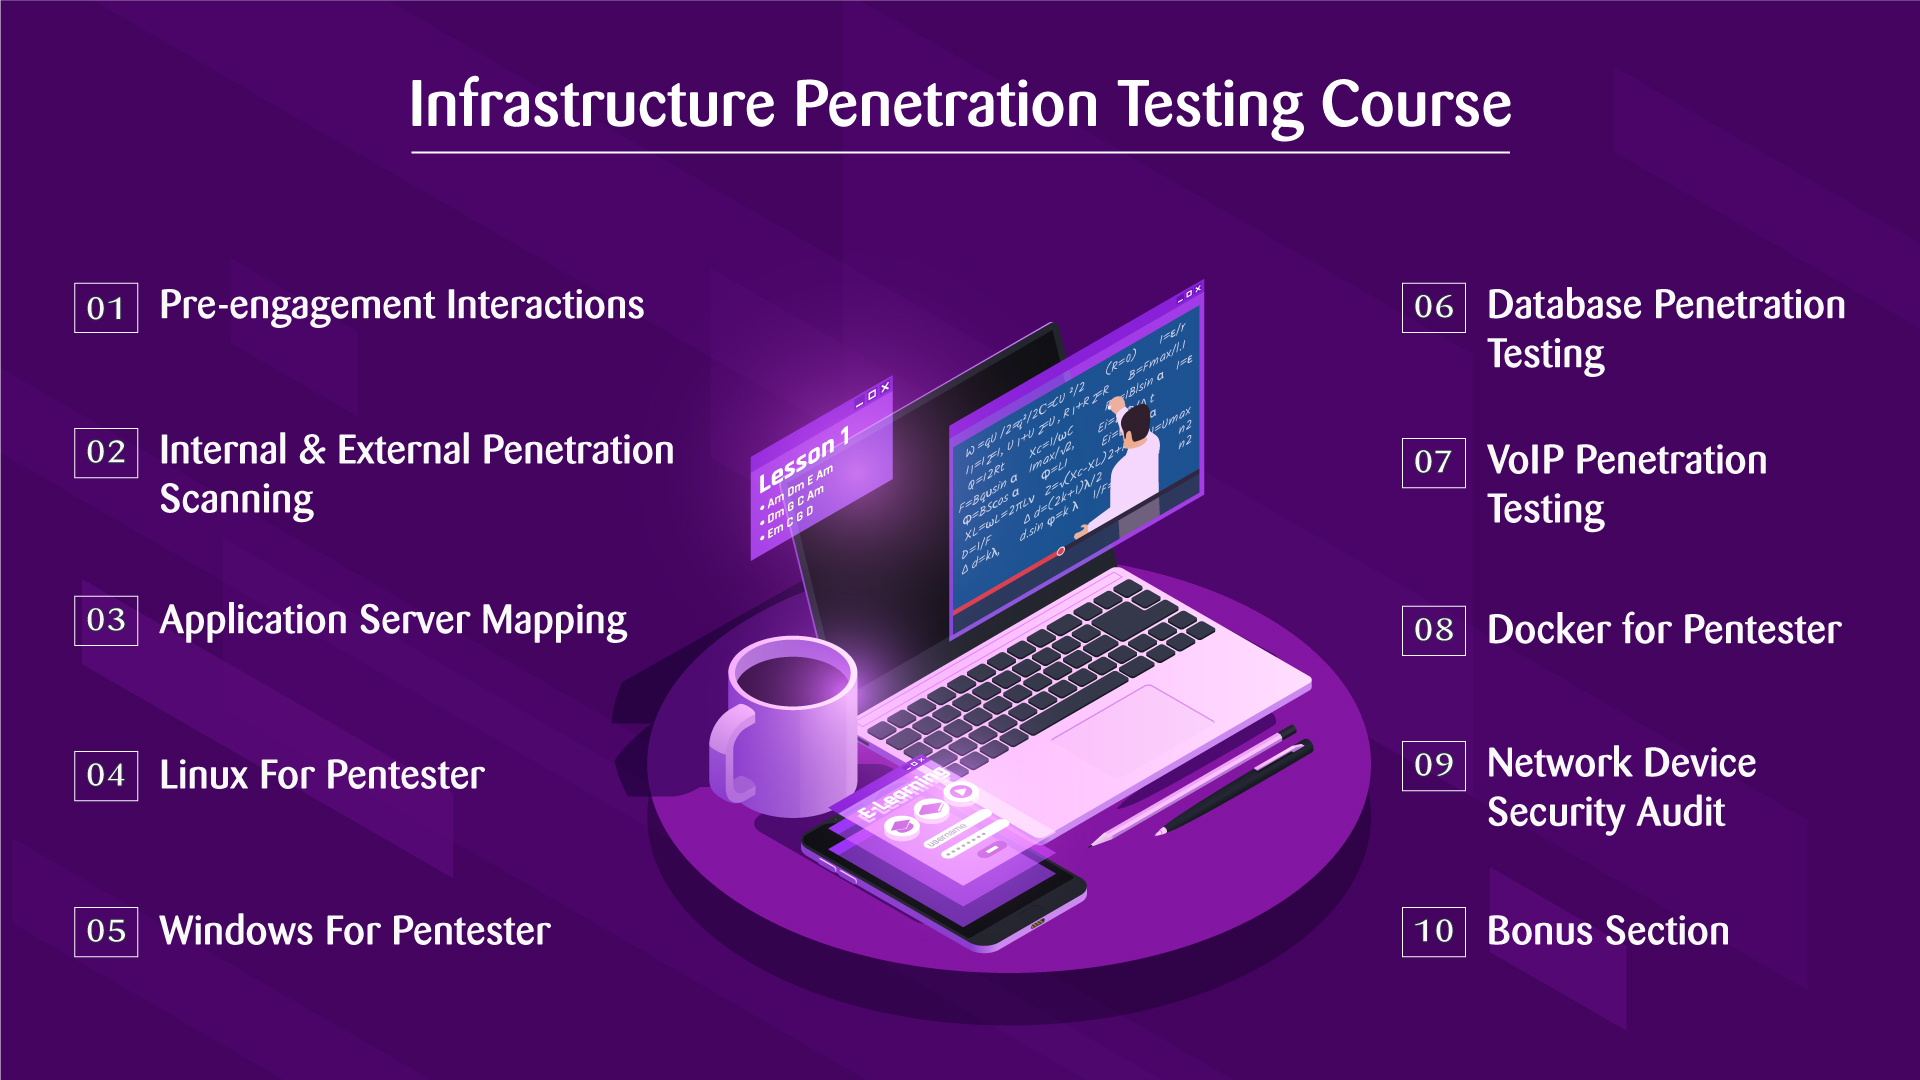 Infrastructure Penetration Testing